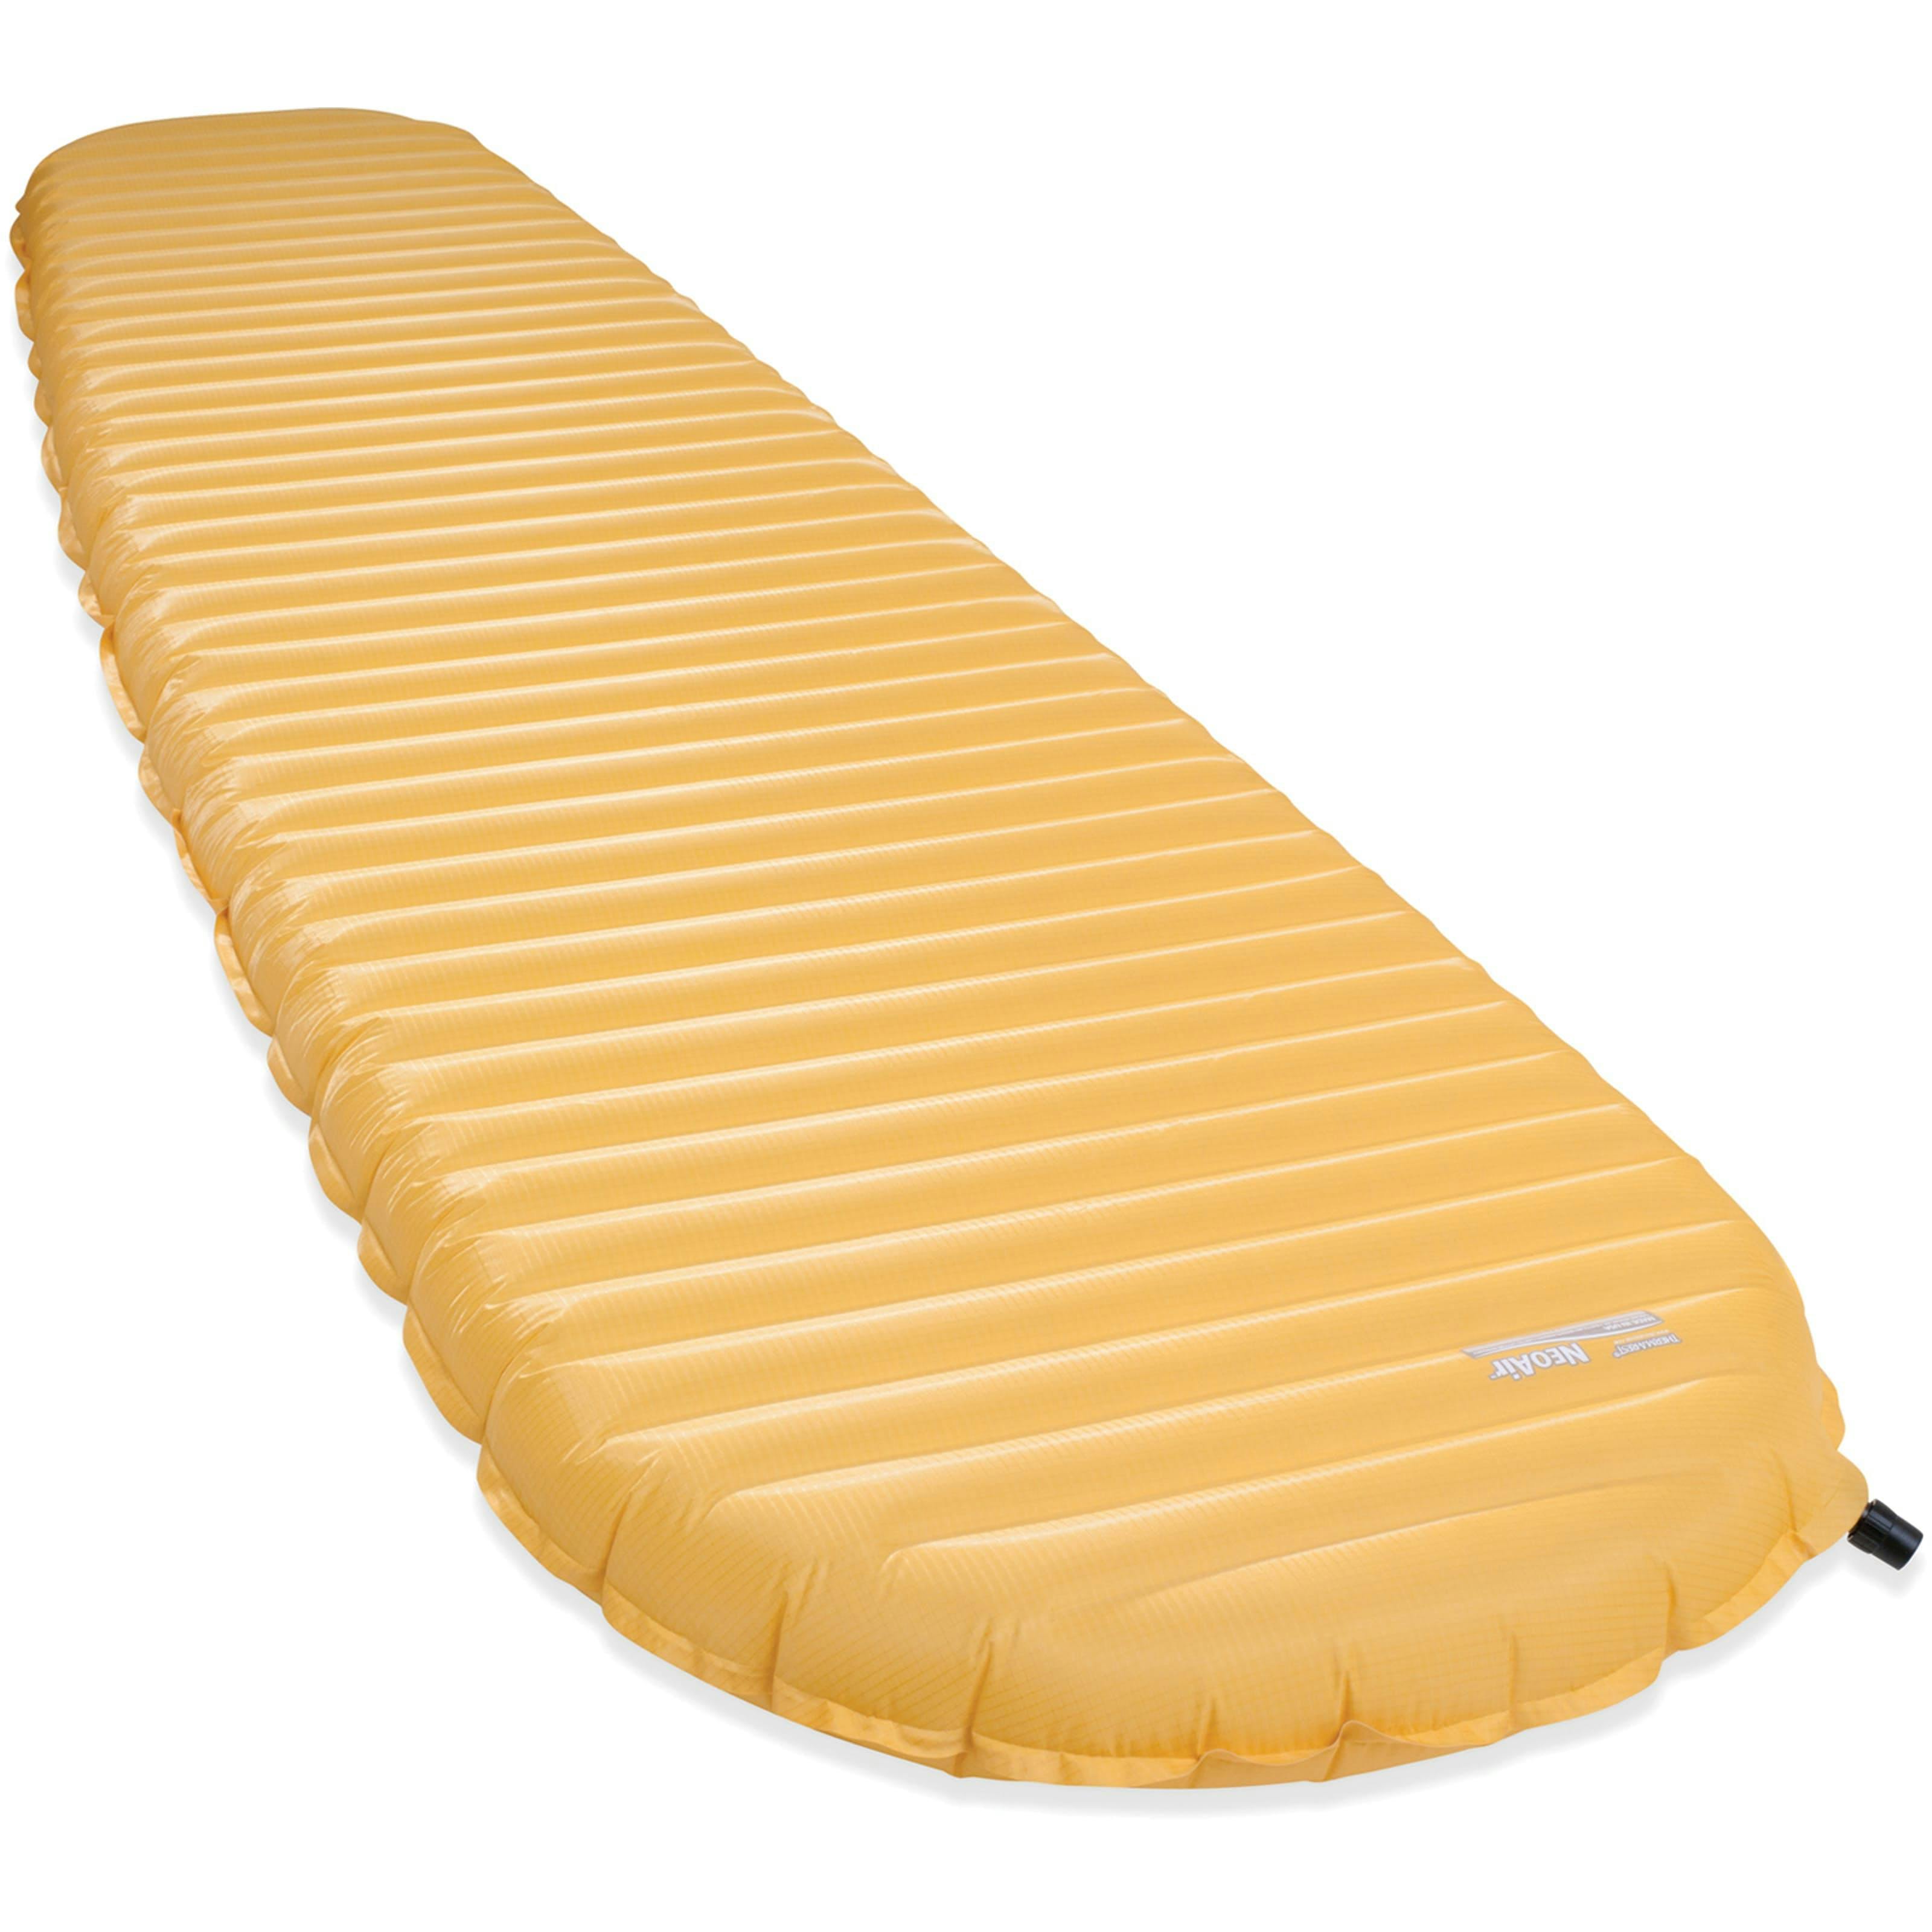 Therm-a-rest NeoAir XLite Sleeping pad